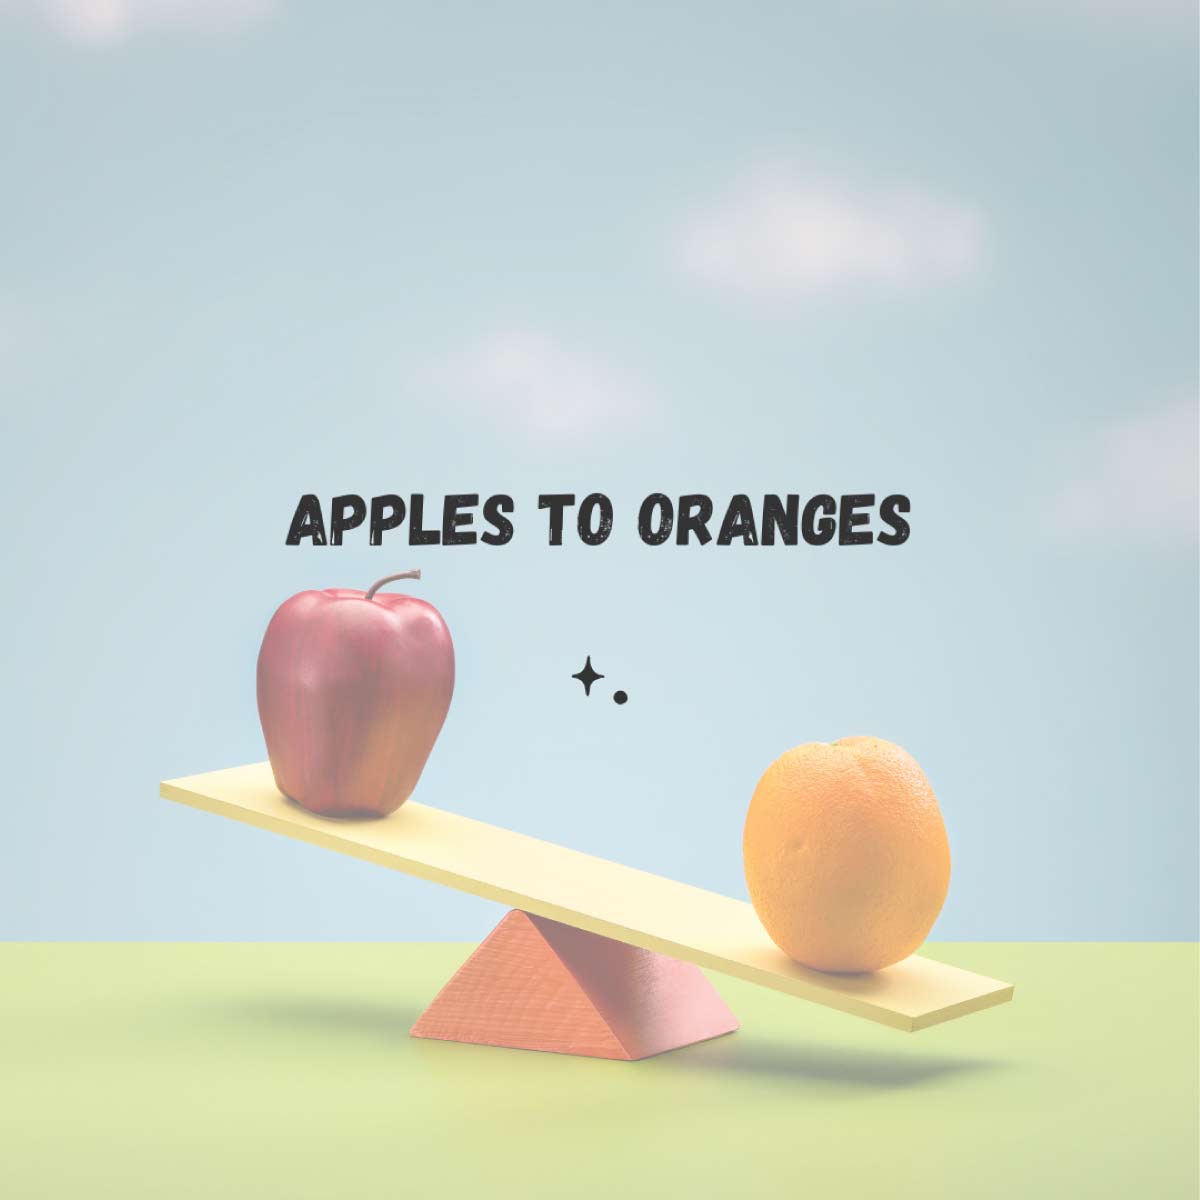 Apples to oranges. An apple on one side of a seesaw and an orange on the other to show a comparison.